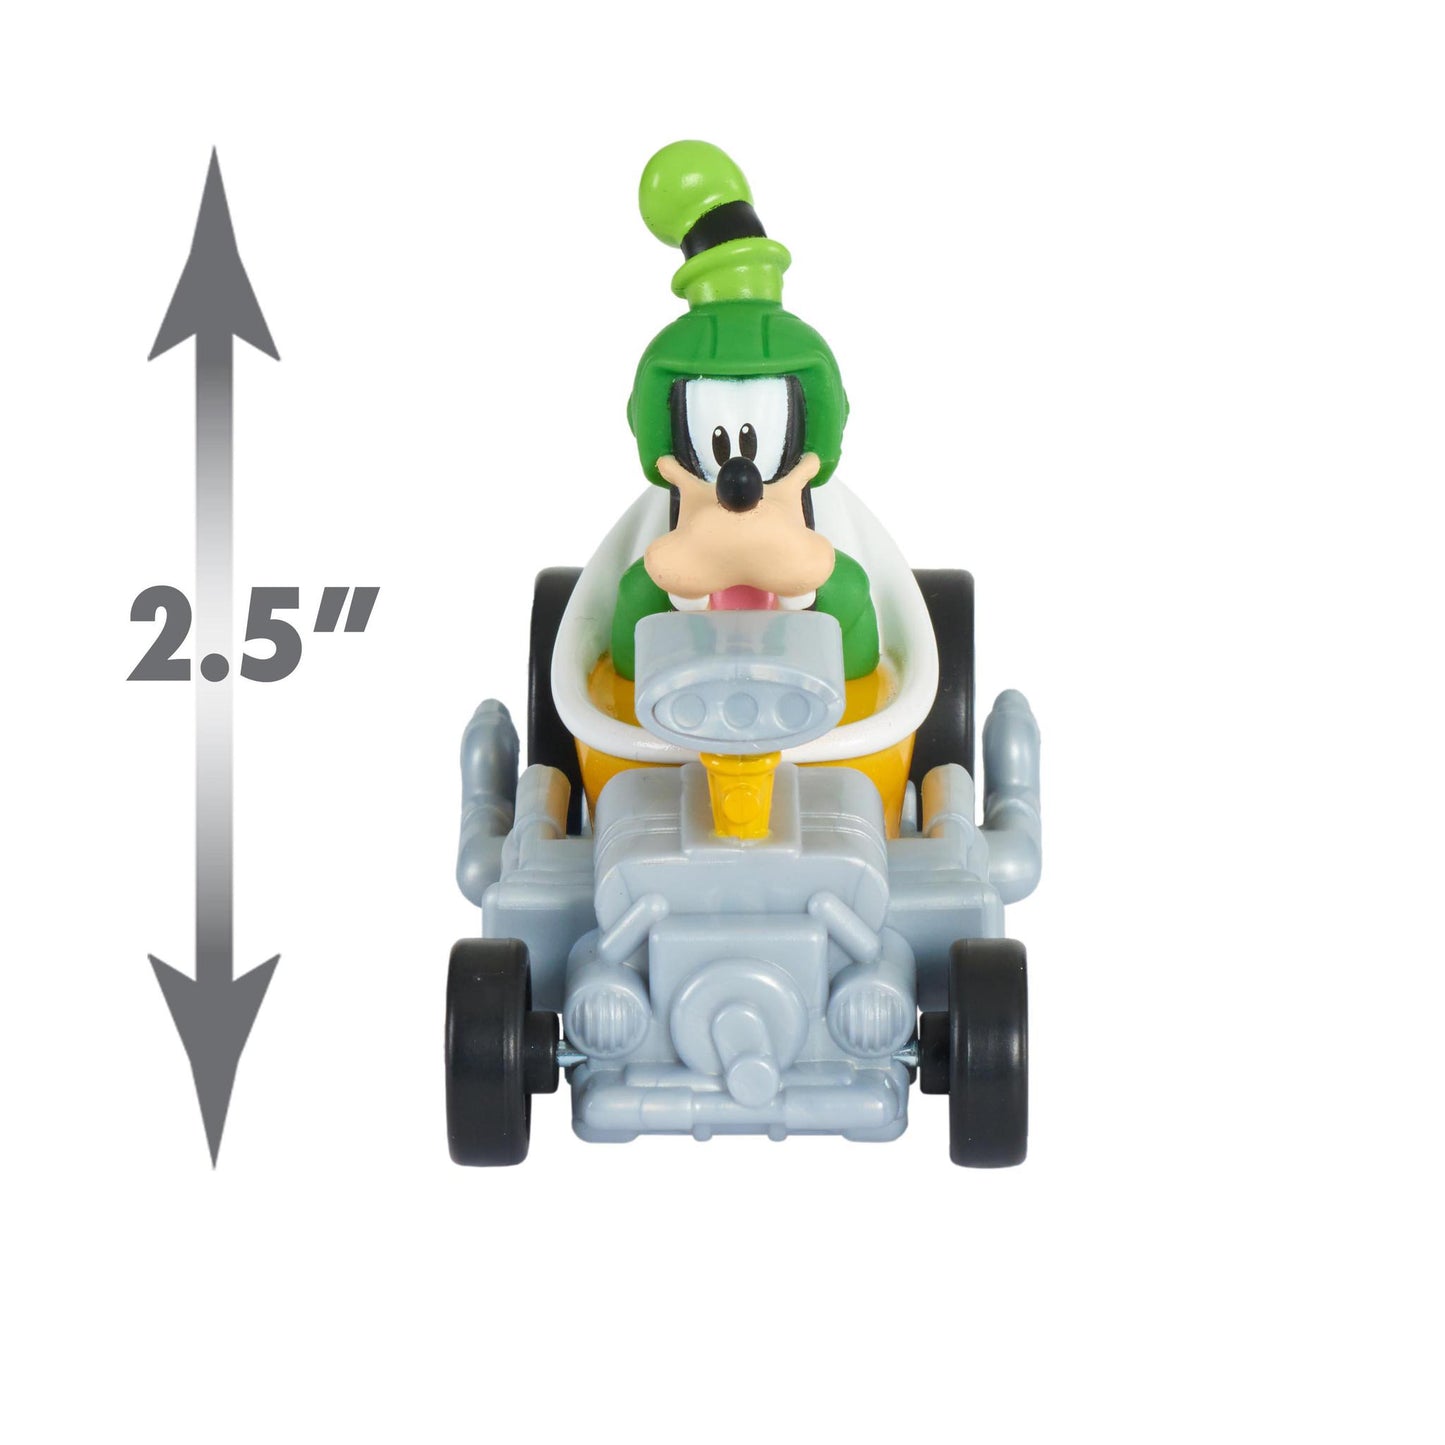 Disney Mickey Mouse Die Cast Vehicle - Goofy's Roadster